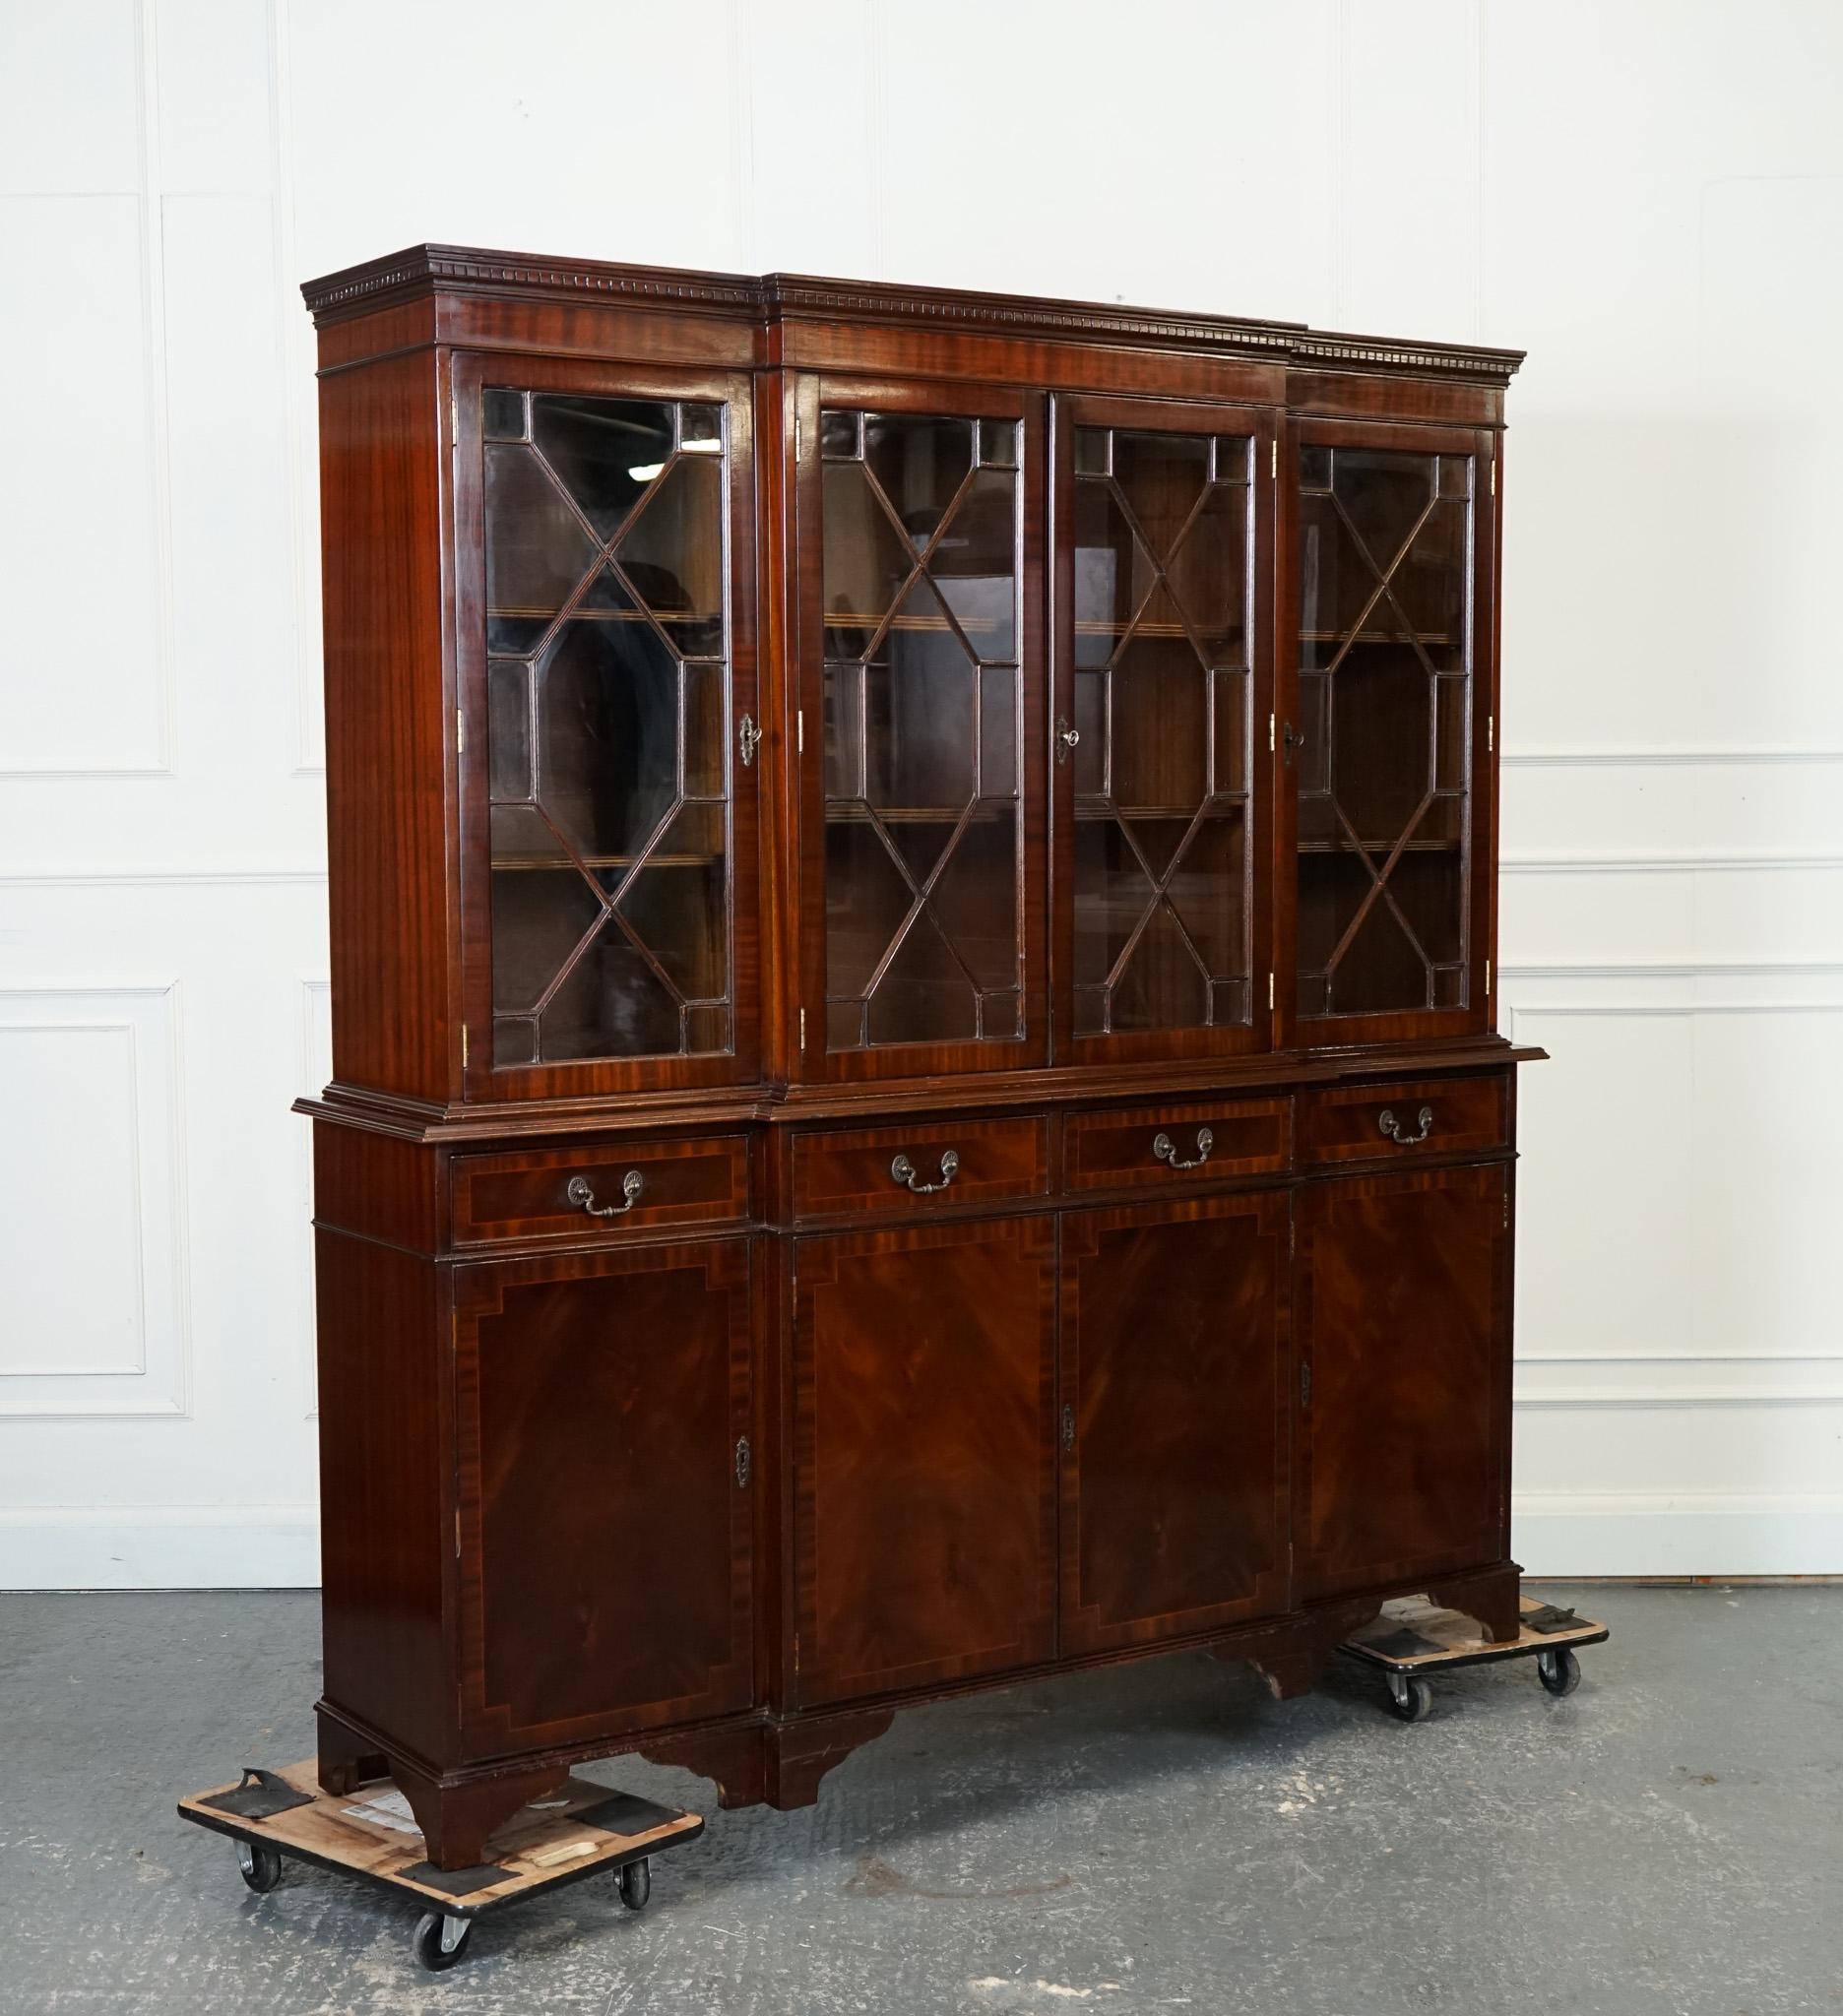 
We are delighted to offer for sale this Large English four-door breakfast bookcase.

A lovely large English four-door Georgian-style breakfront bookcase is a stunning piece of furniture that embodies the elegance and grandeur of traditional